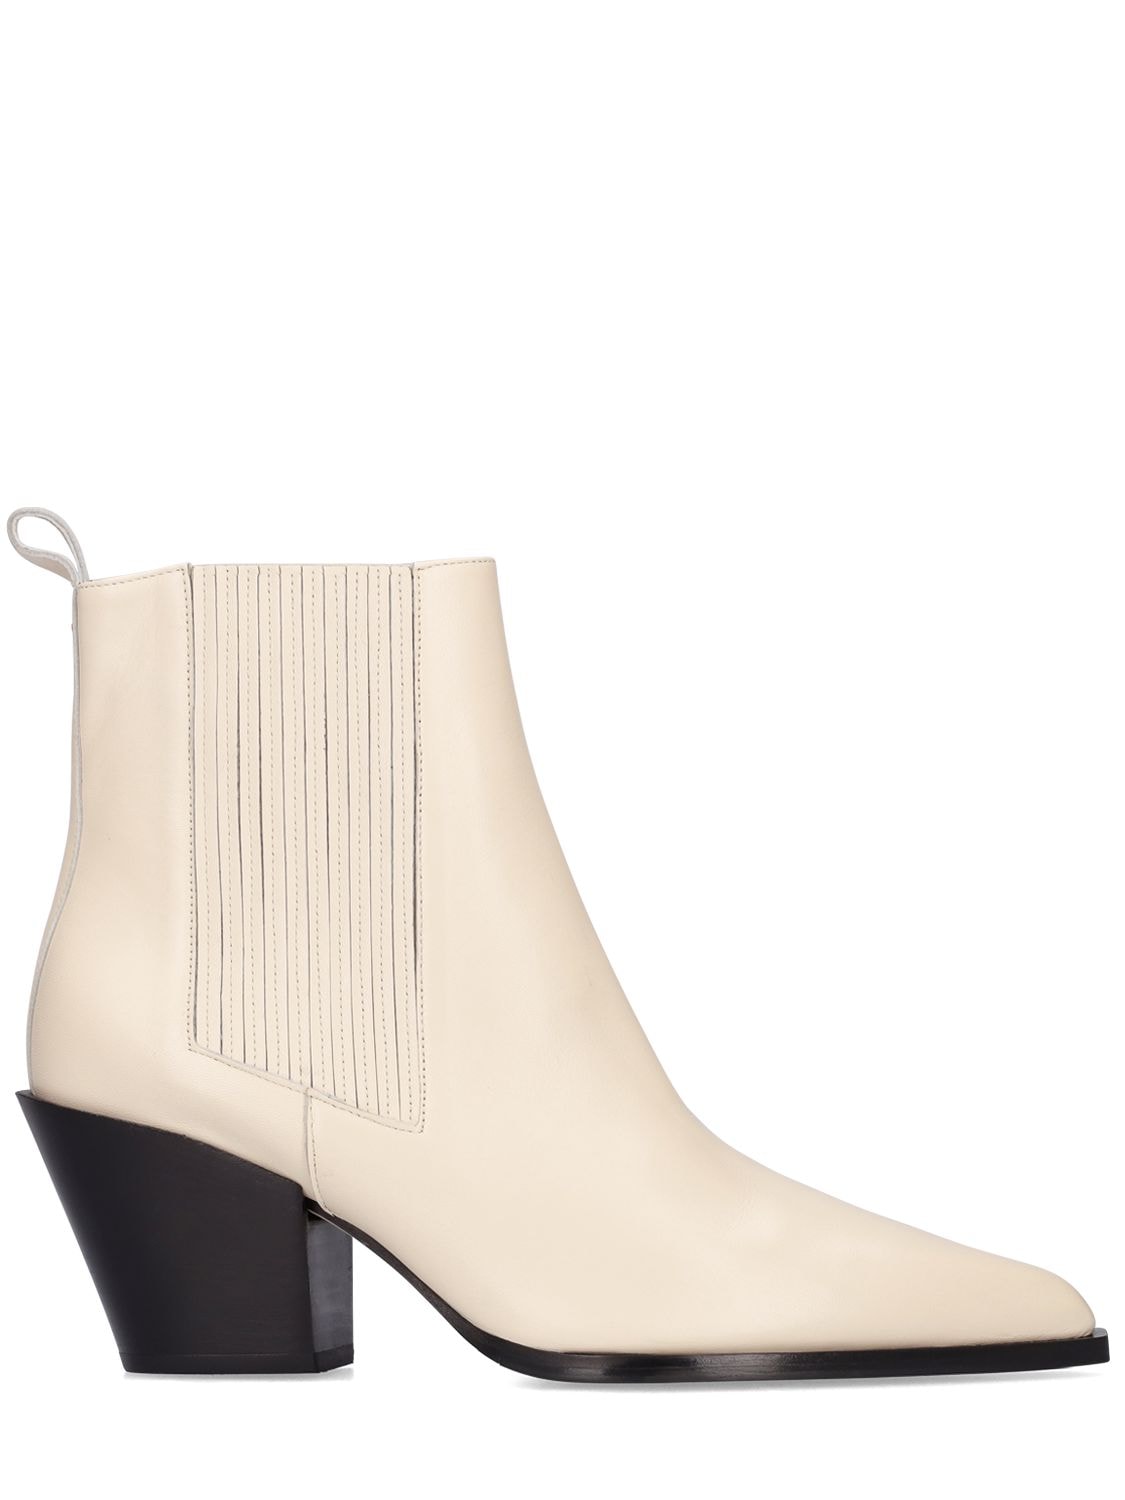 Aeyde 75mm Leather Boots In Cream | ModeSens